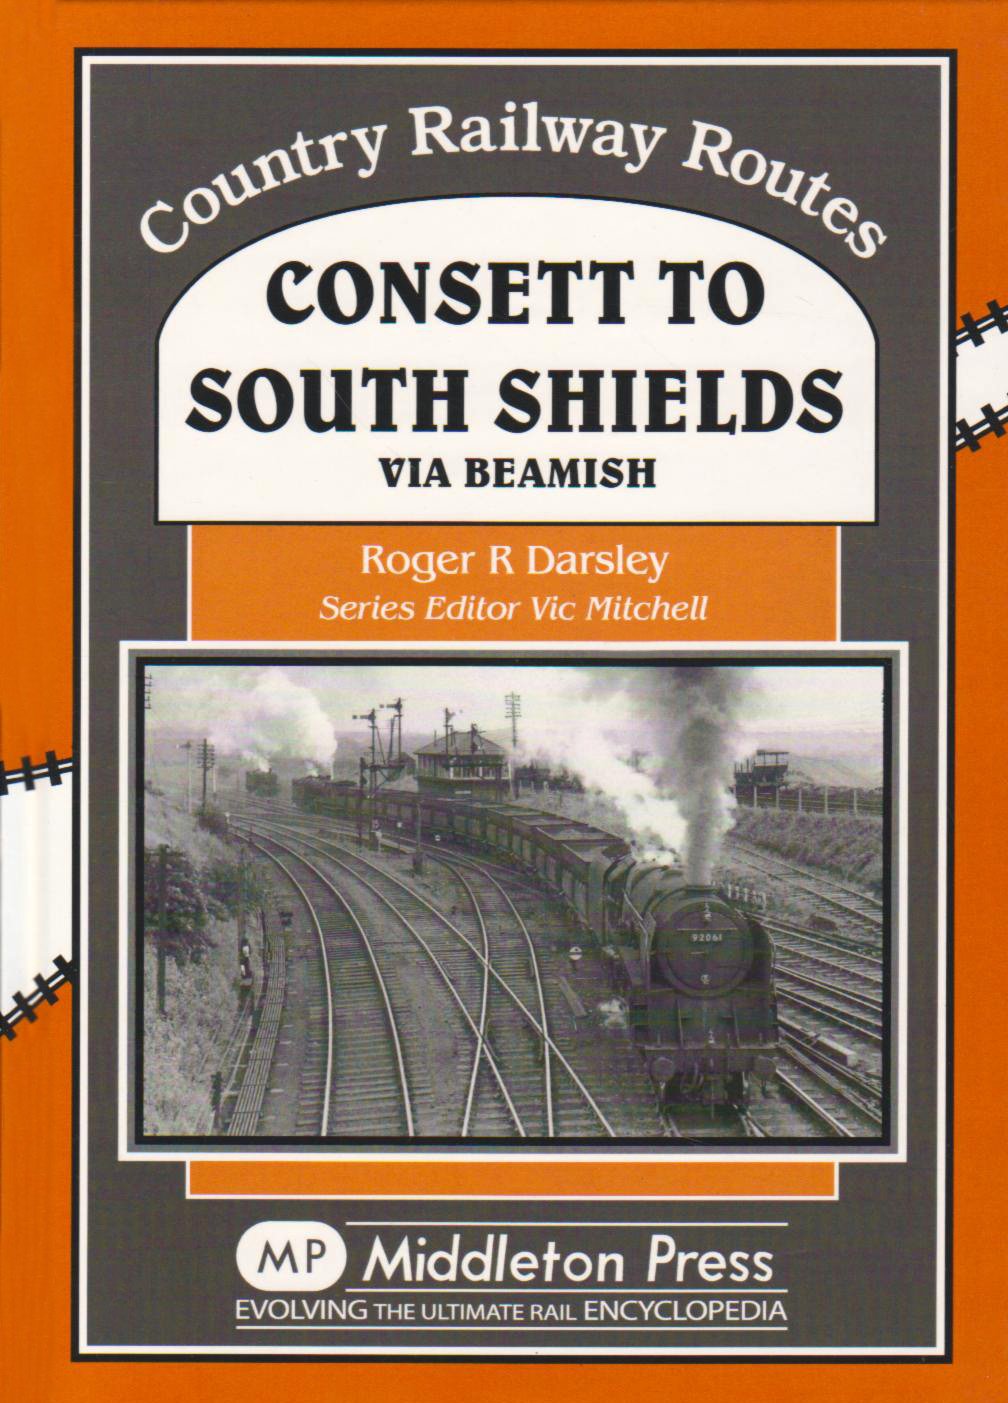 Country Railway Routes Consett to South Shields via Beamish OUT OF PRINT TO BE REPRINTED